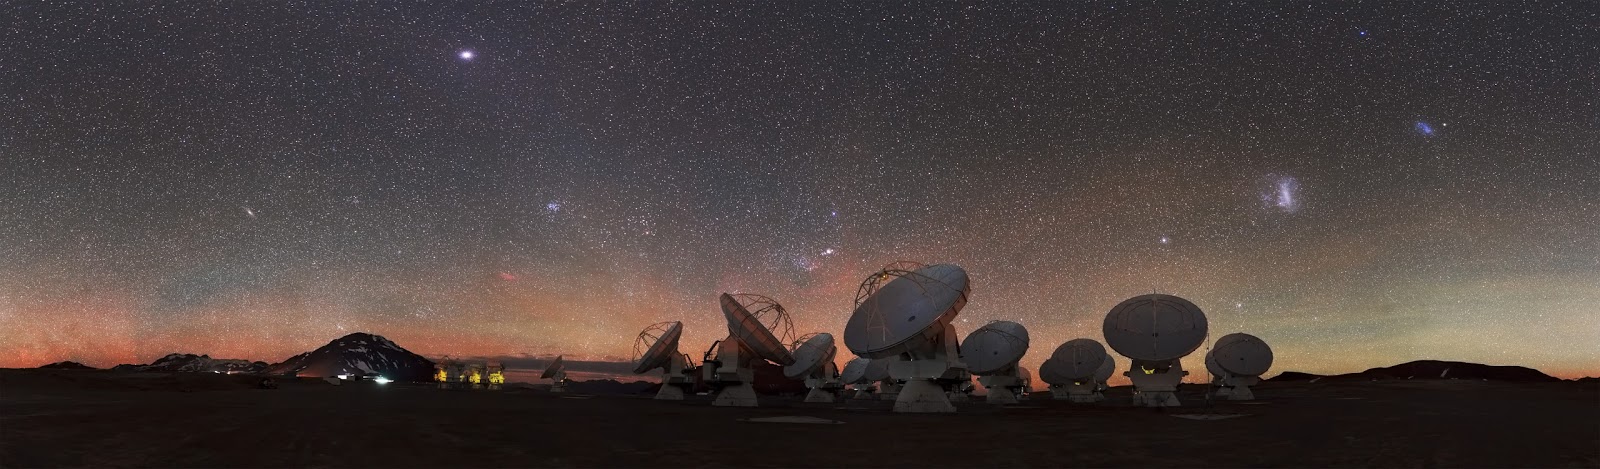 In Search of Space In Search of Space   At 5000 metres above sea level, high upon the Chajnantor Plateau in Chile, the antennas of the ALMA Observatory peer skywards, scanning the Universe for clues to our cosmic origins. This plateau is one of the highest observatory sites on Earth.  Visible amongst the thousands of stars on the right side of this image are the Small and Large Magellanic Clouds, appearing as luminous smudges in the sky. These cloud-like objects are both galaxies — two of the closest galactic neighbours to our galaxy, the Milky Way.  ALMA's main aim is to observe the coldest and most ancient objects in the cosmos — known as the "cold Universe". The array measures radiation emitted in the millimetre and submillimetre wavelengths, which lie in between infrared and radio waves in the electromagnetic spectrum. It features 66 mobile antennas which can be moved and configured over the ALMA site to meet the scientists' requirements, making it the biggest astronomical experiment in existence.  This amazing picture of the ALMA landscape was taken by ESO Photo Ambassador Stéphane Guisard, an optics engineer at the European Southern Observatory's Very Large Telescope in the Atacama Desert, Chile.  Image Credit: ESO/S. Guisard Explanation from: http://www.eso.org/public/images/potw1431a/